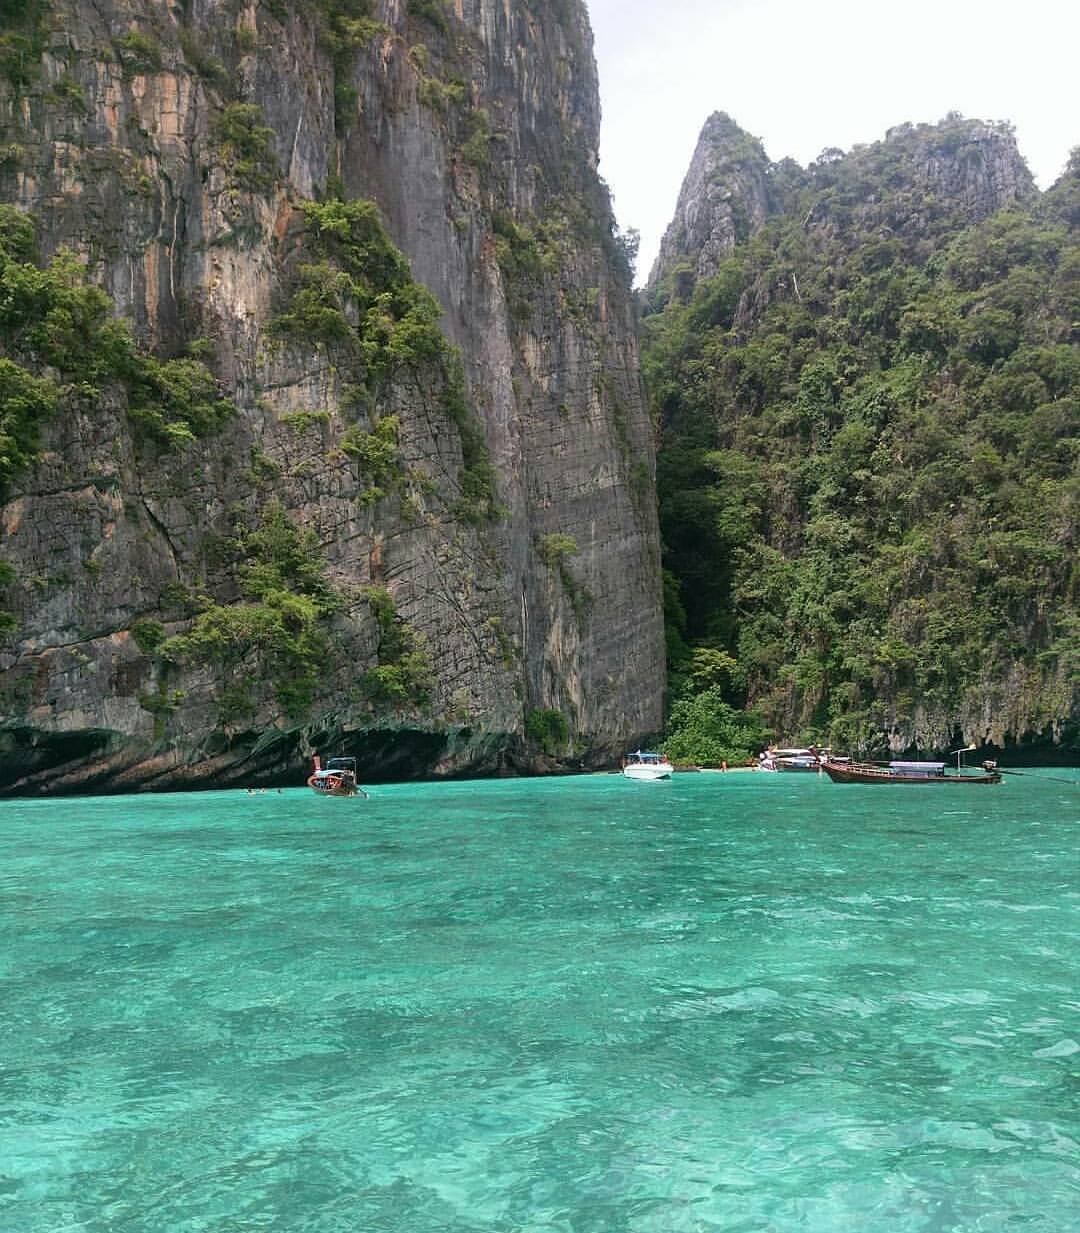 Crystal clear and stunning Phi Phi Island, as always.
Thank you @marinadelavega for sharing with us.
——
Follow us on Instagram @tourismthailand and hashtag #tourismthailand and #amazingthailand in order to share your experience.